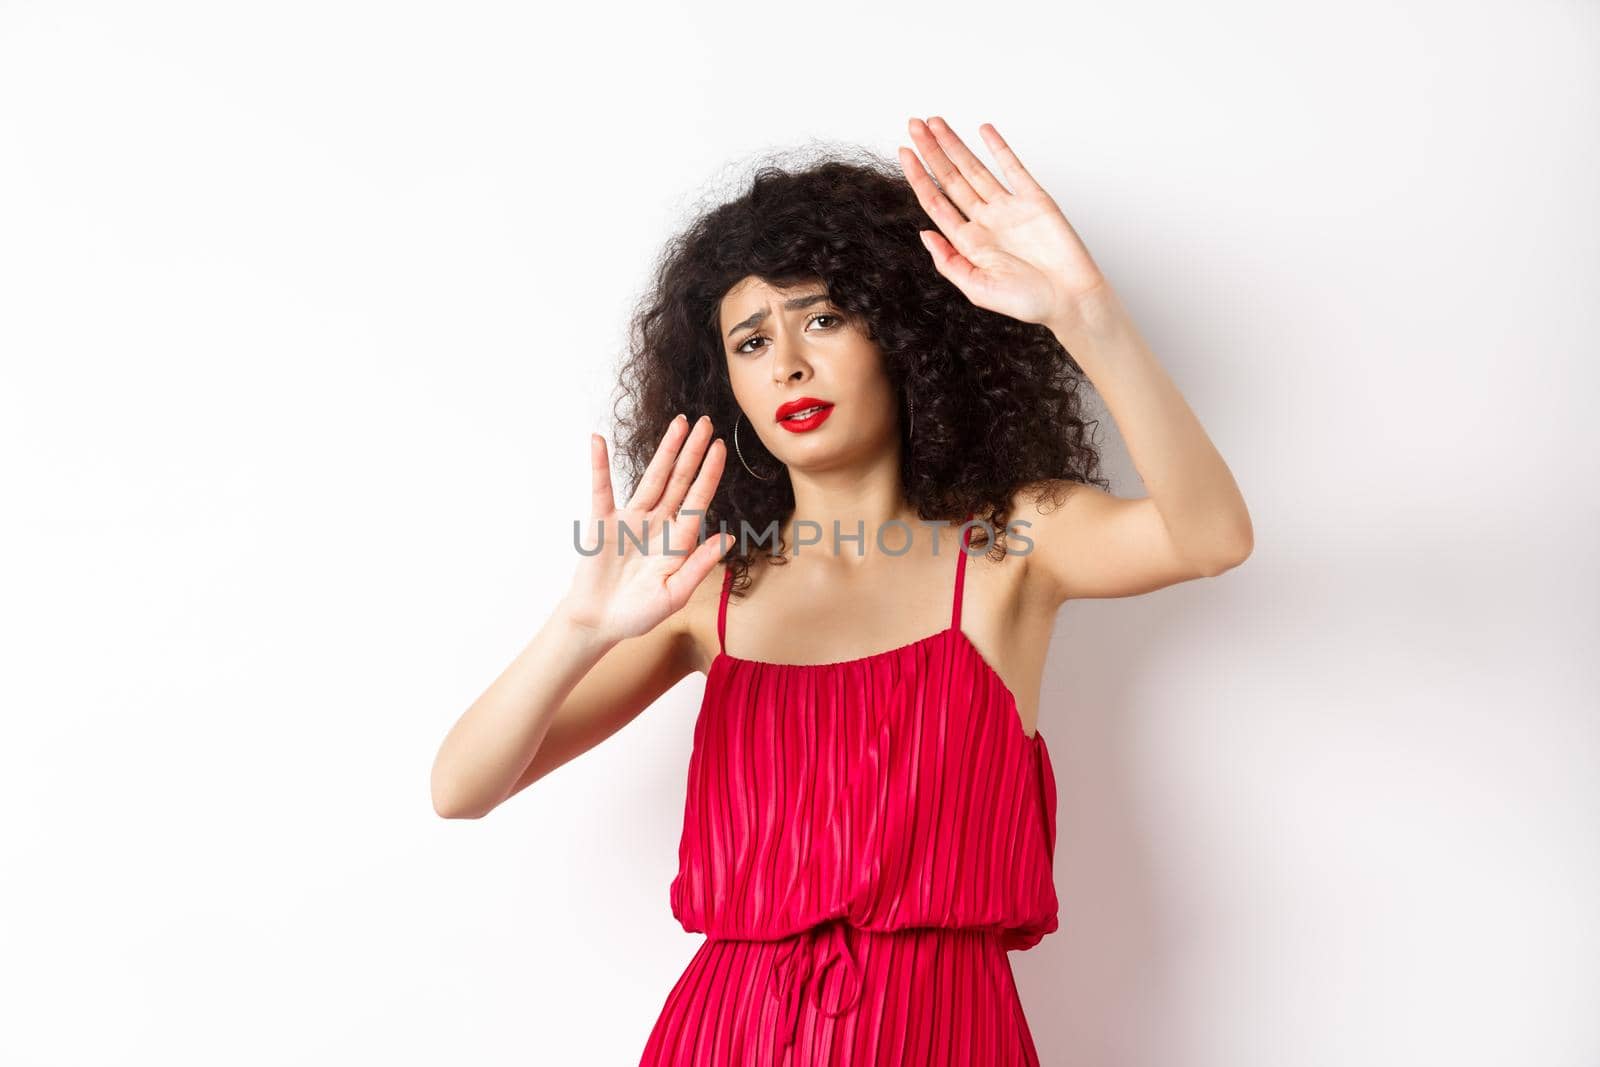 Young woman with curly hair and red dress, asking to stop, block someone, raising hands defensive, protecting herself, standing against white background.